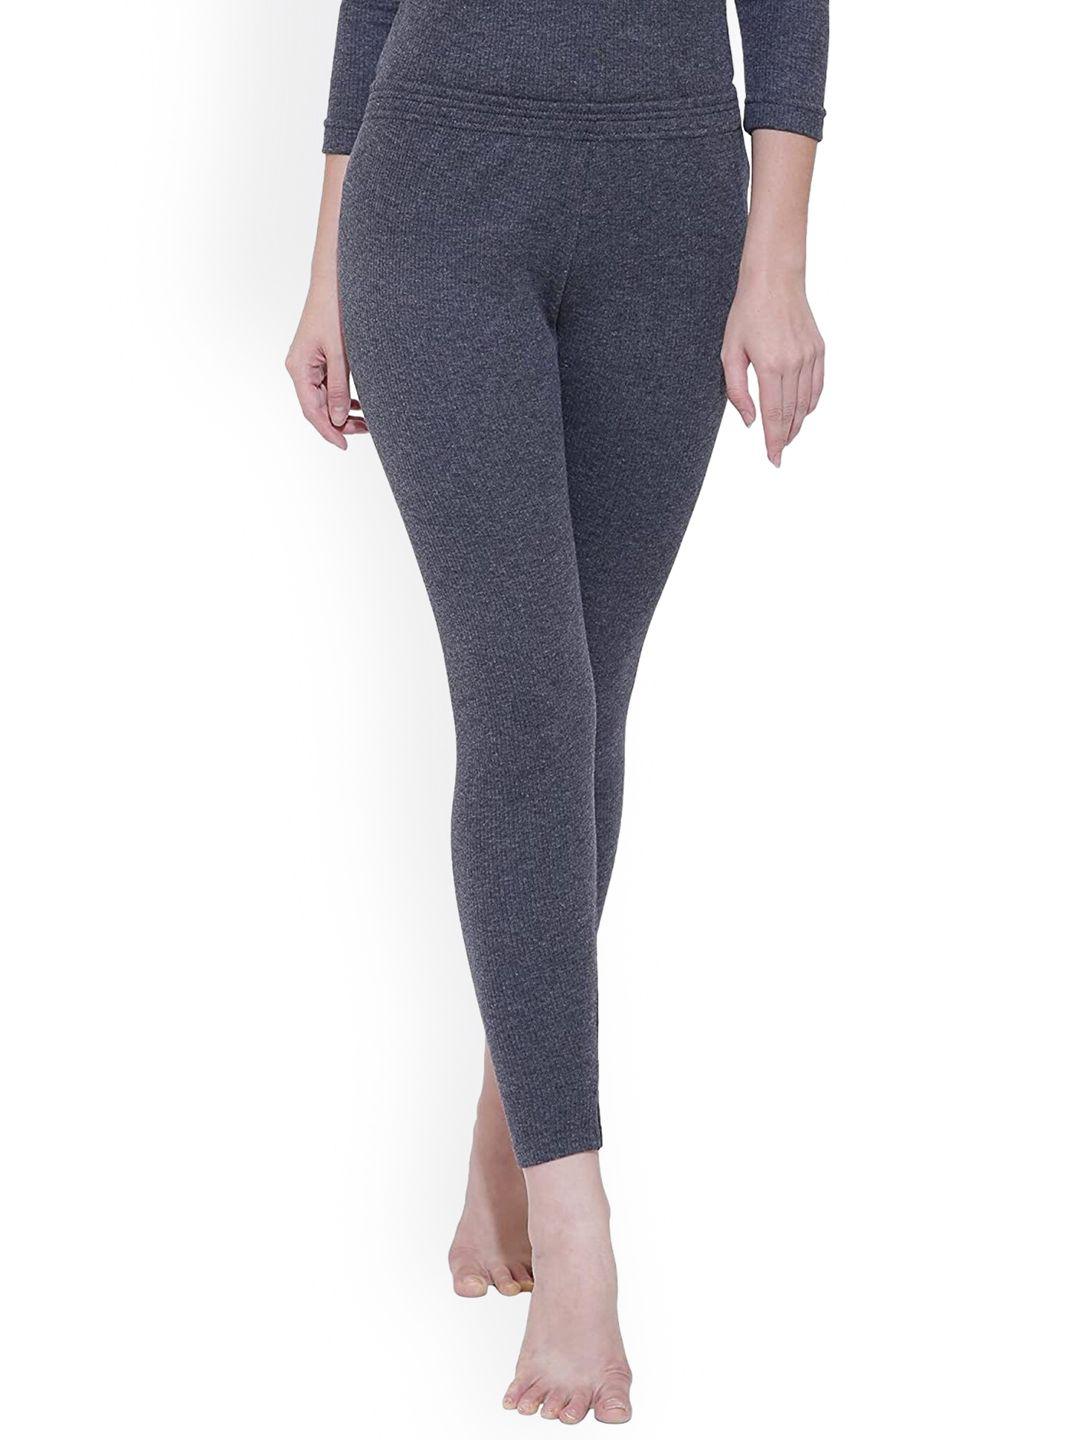 bodycare insider women mid-rise wool thermal bottoms